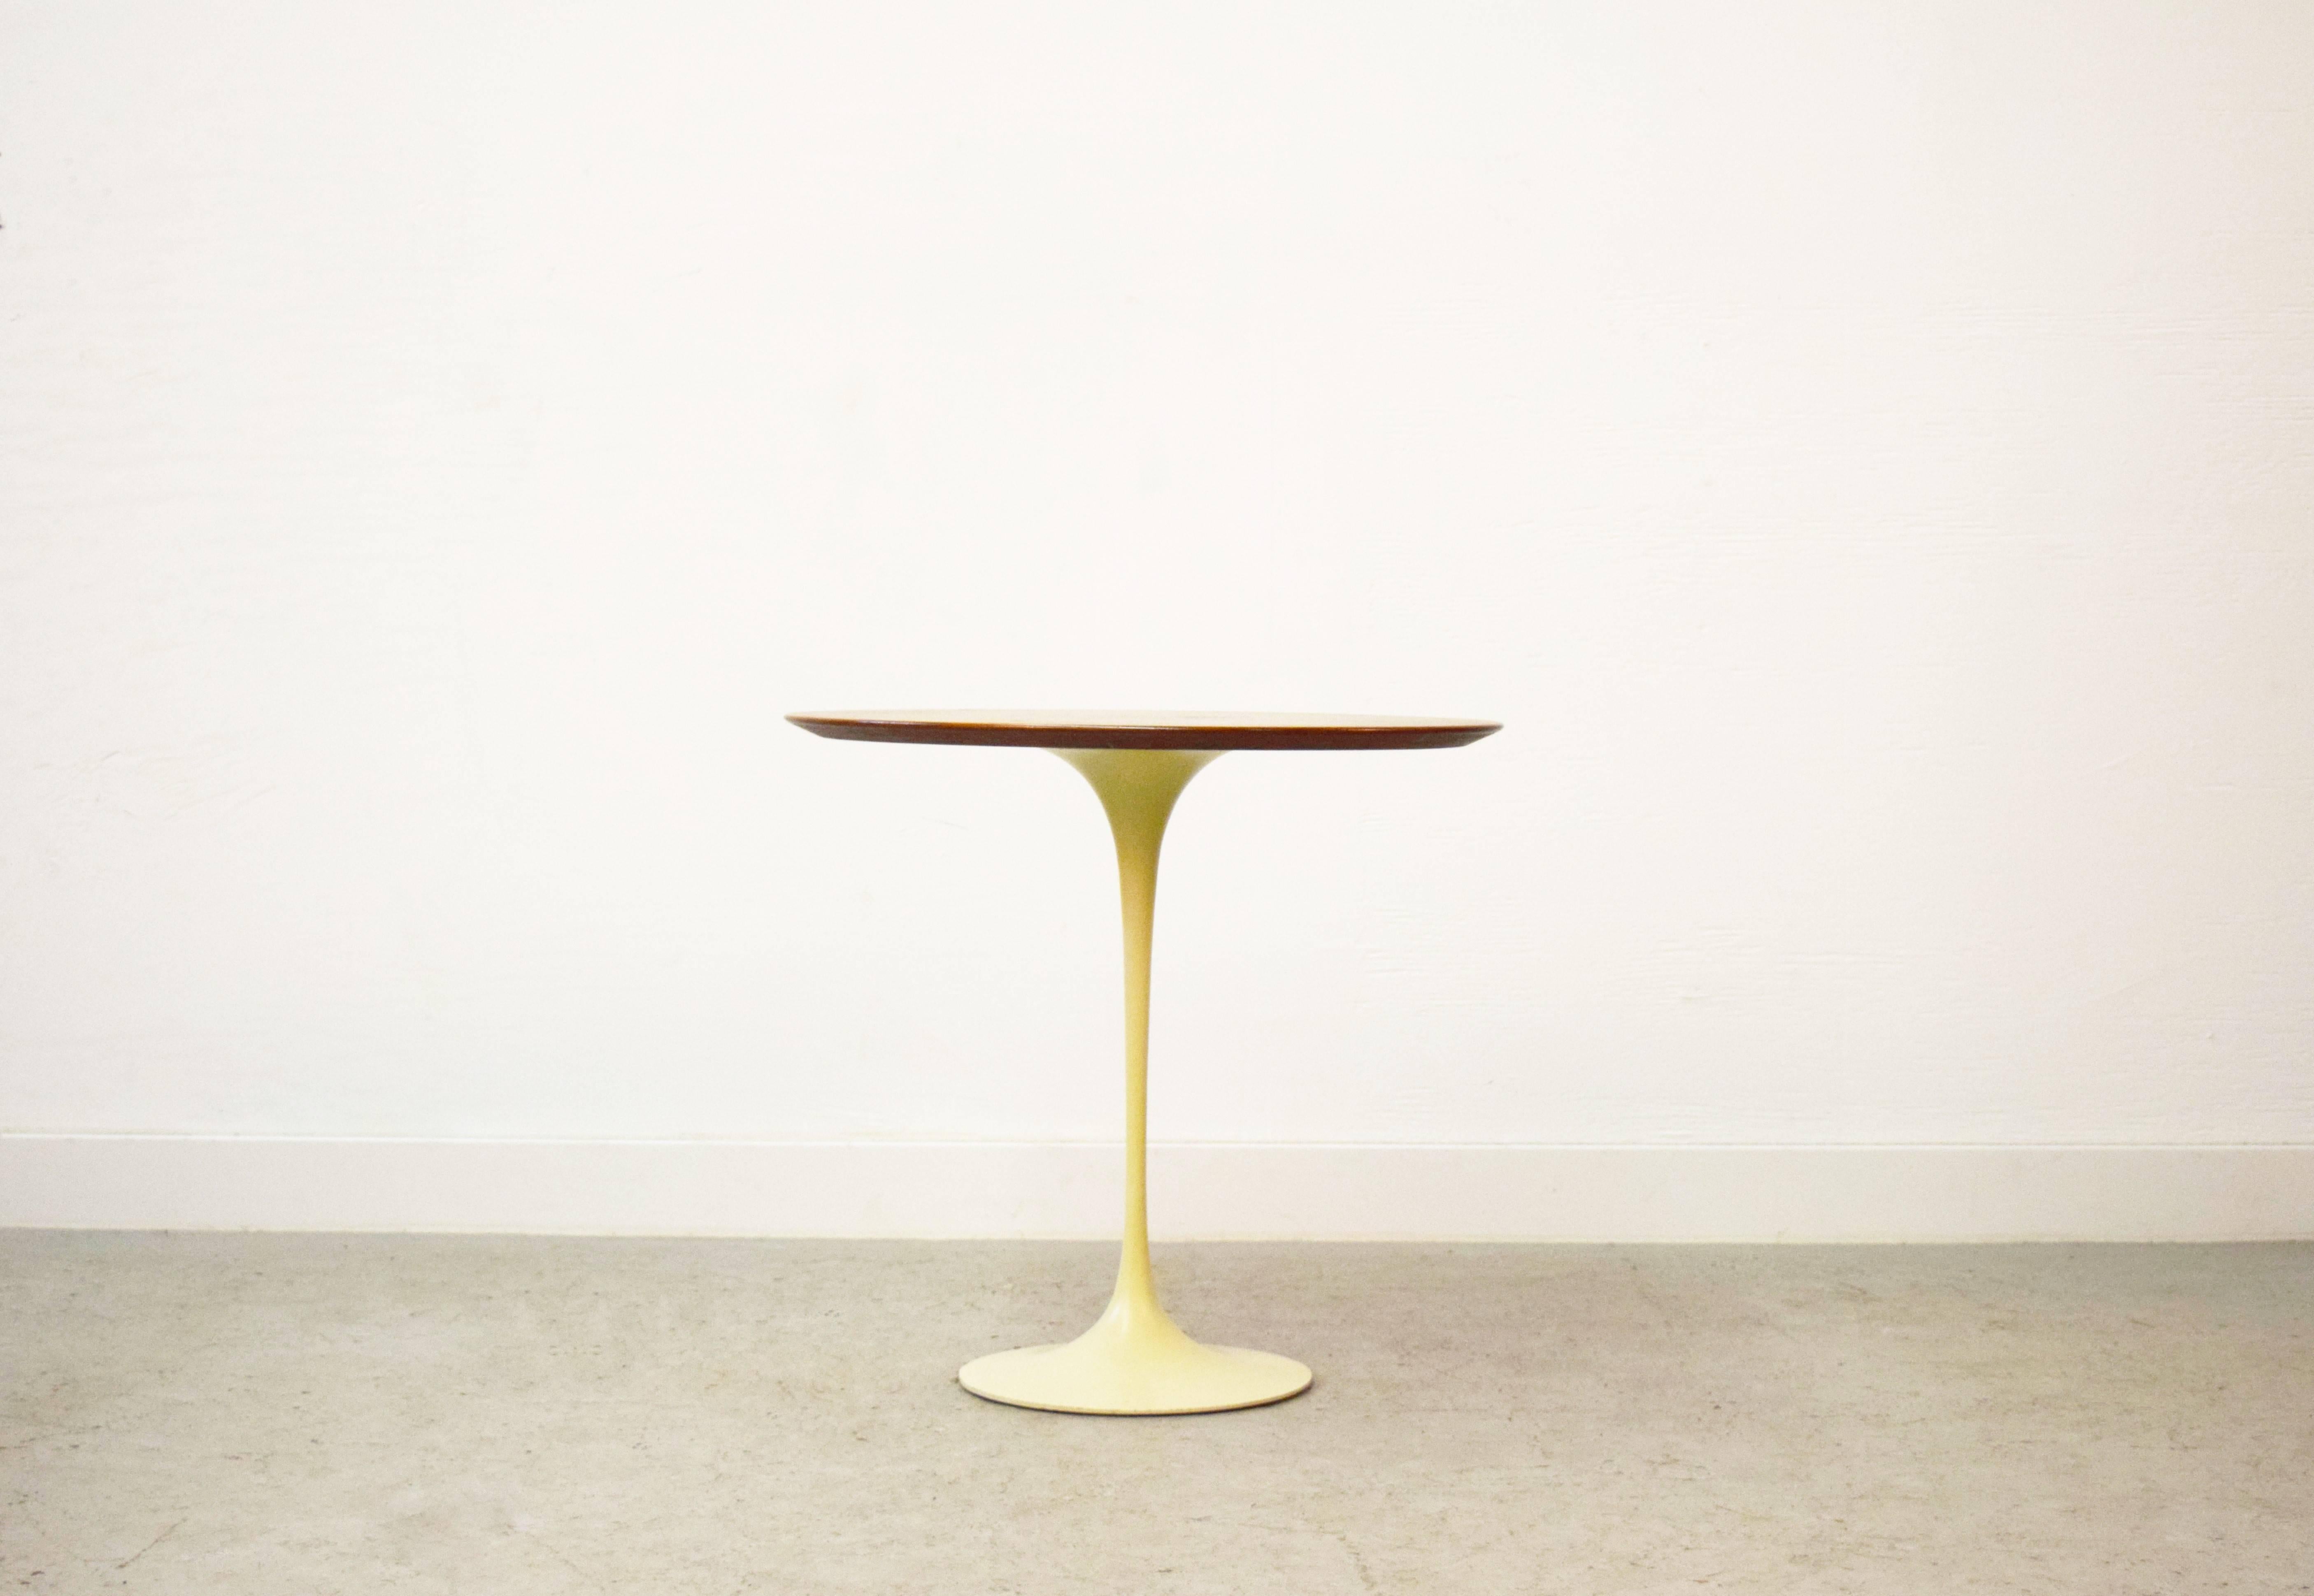 Early Eero Saarinen for Knoll oval tulip side table. Retains early Knoll label.